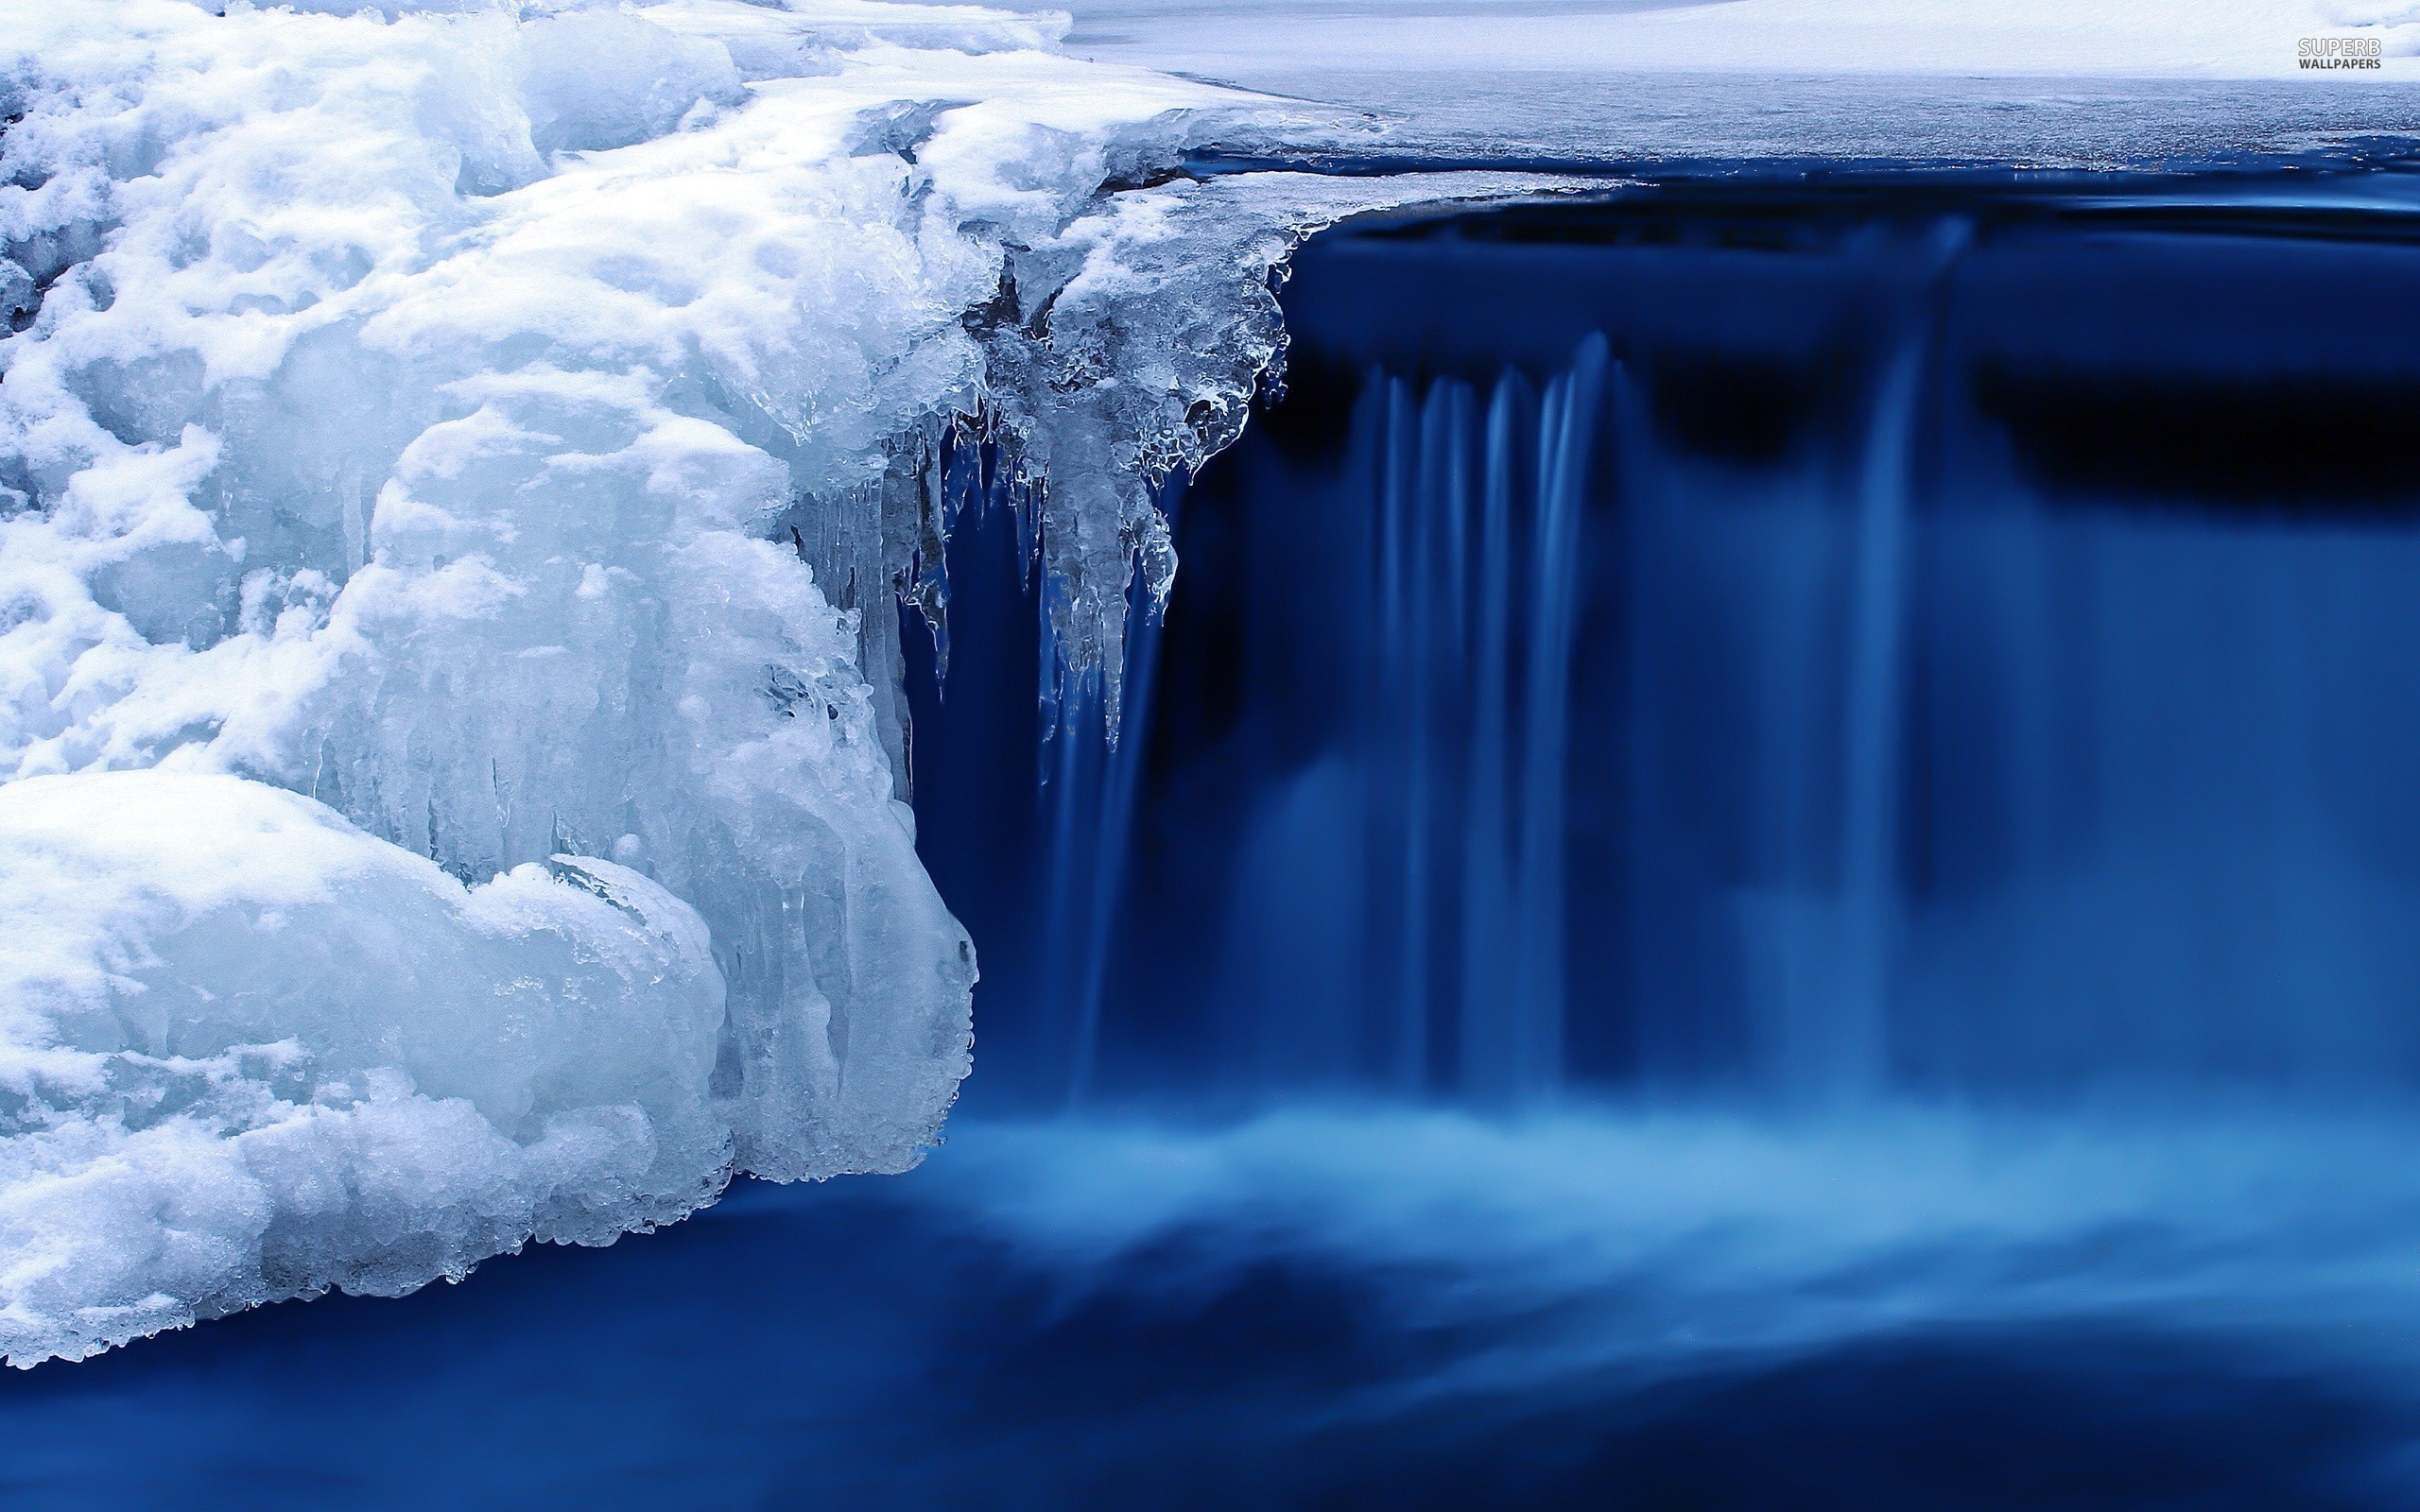 General 2560x1600 landscape winter ice waterfall nature long exposure blue